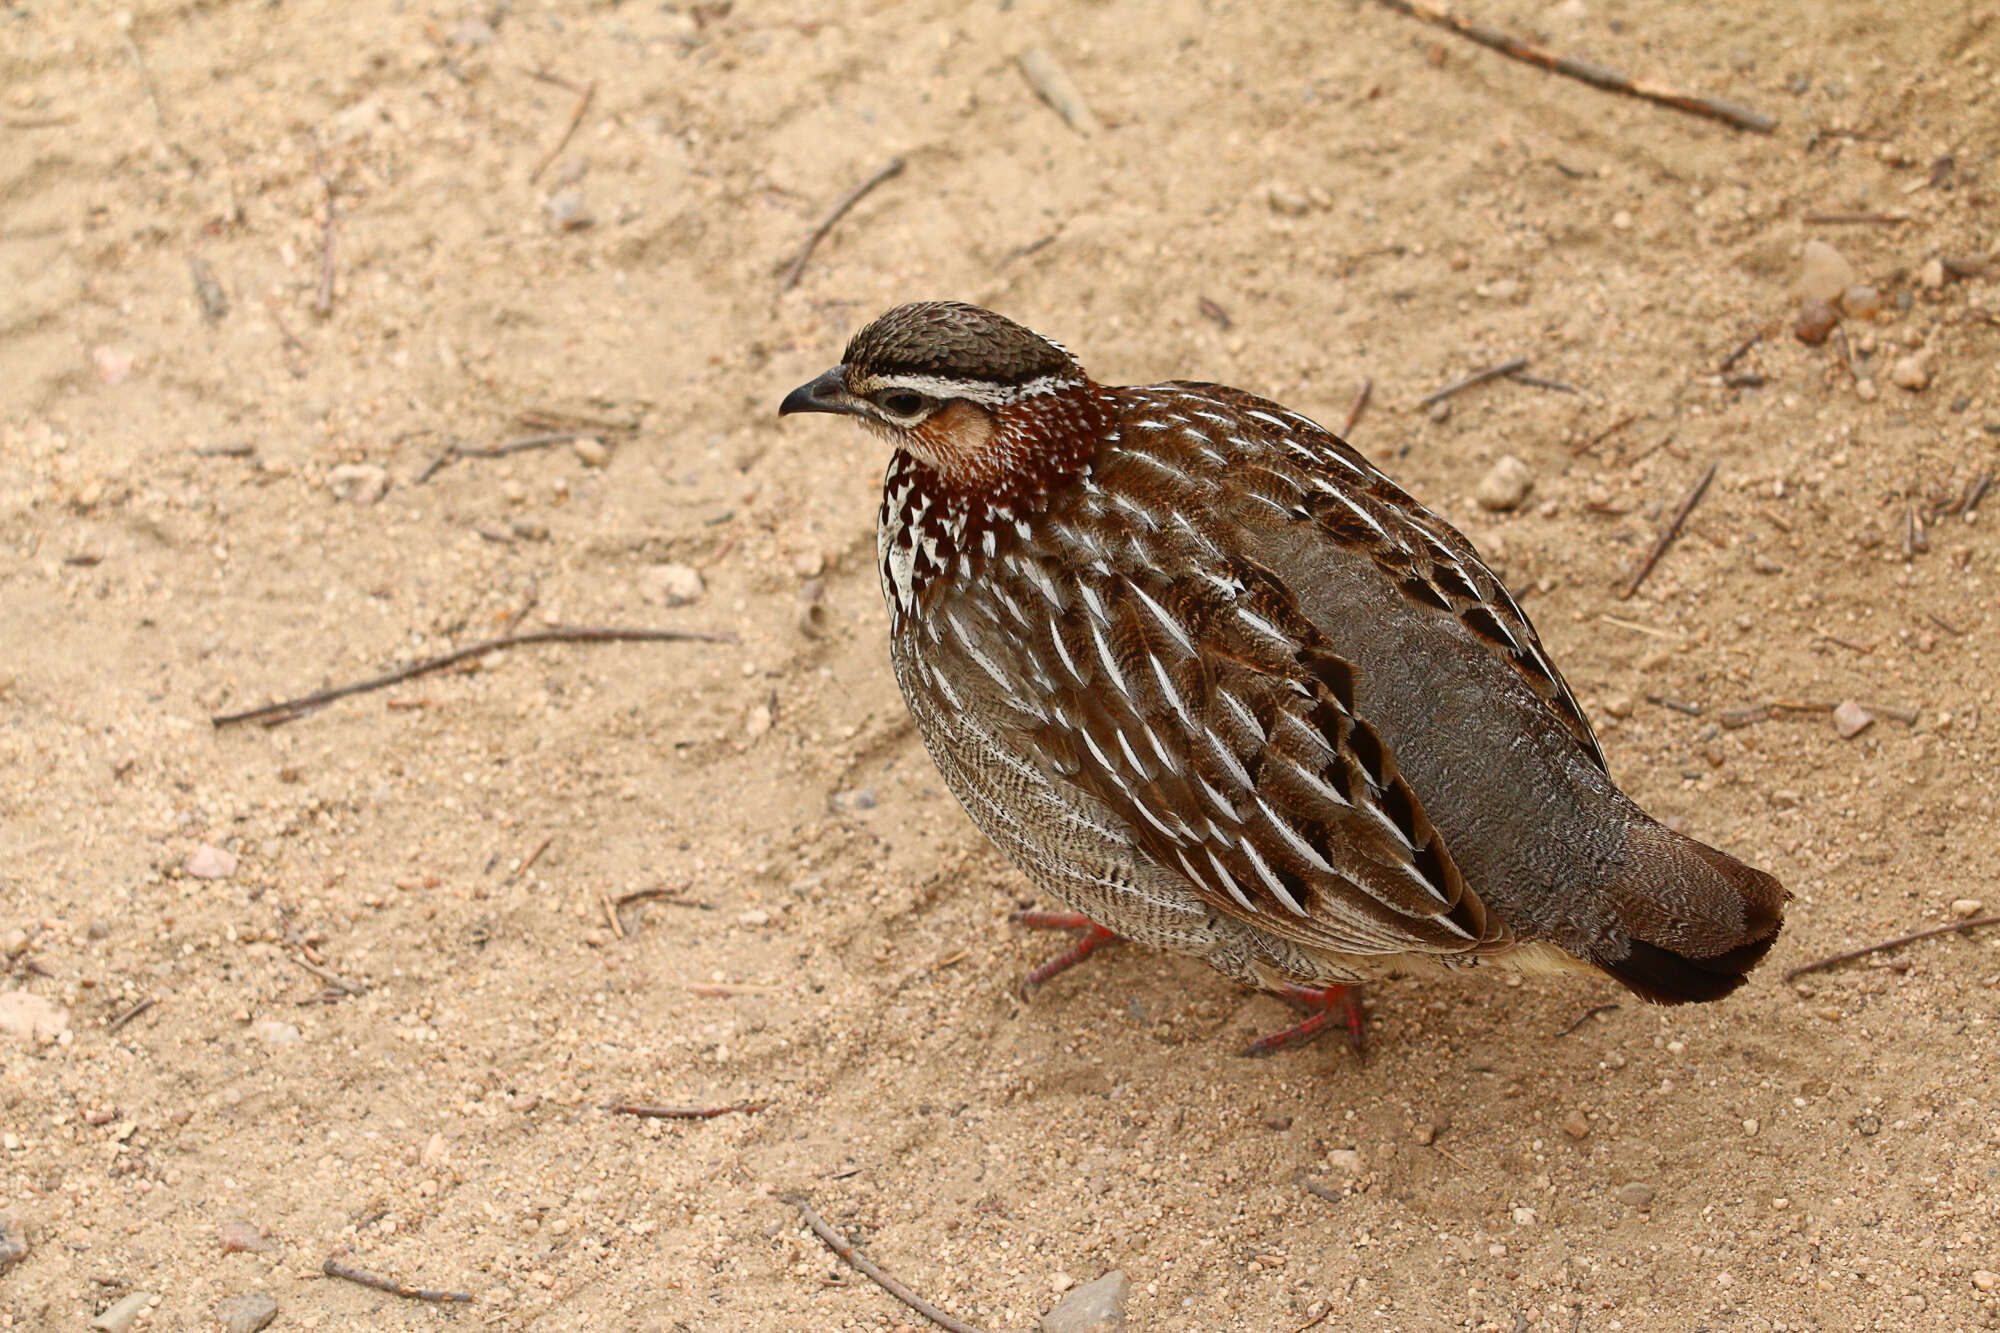 Image of Crested Francolin